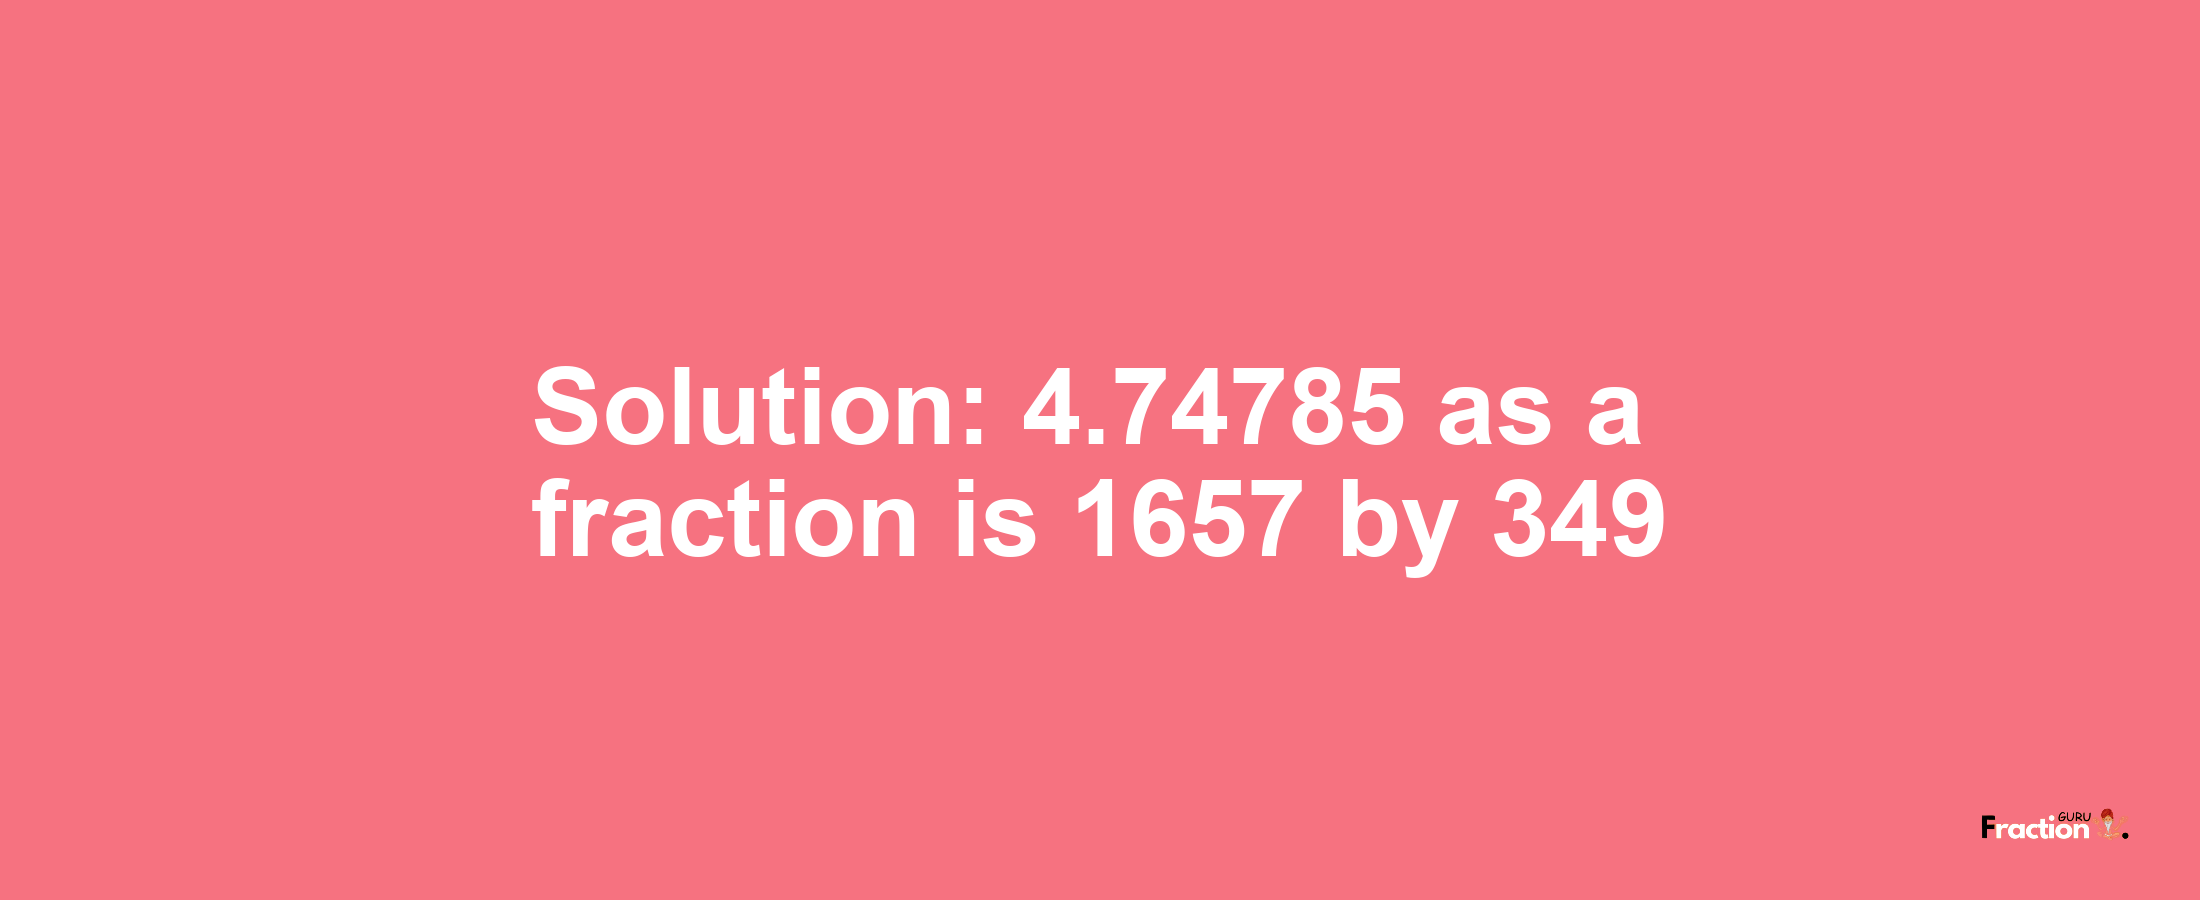 Solution:4.74785 as a fraction is 1657/349